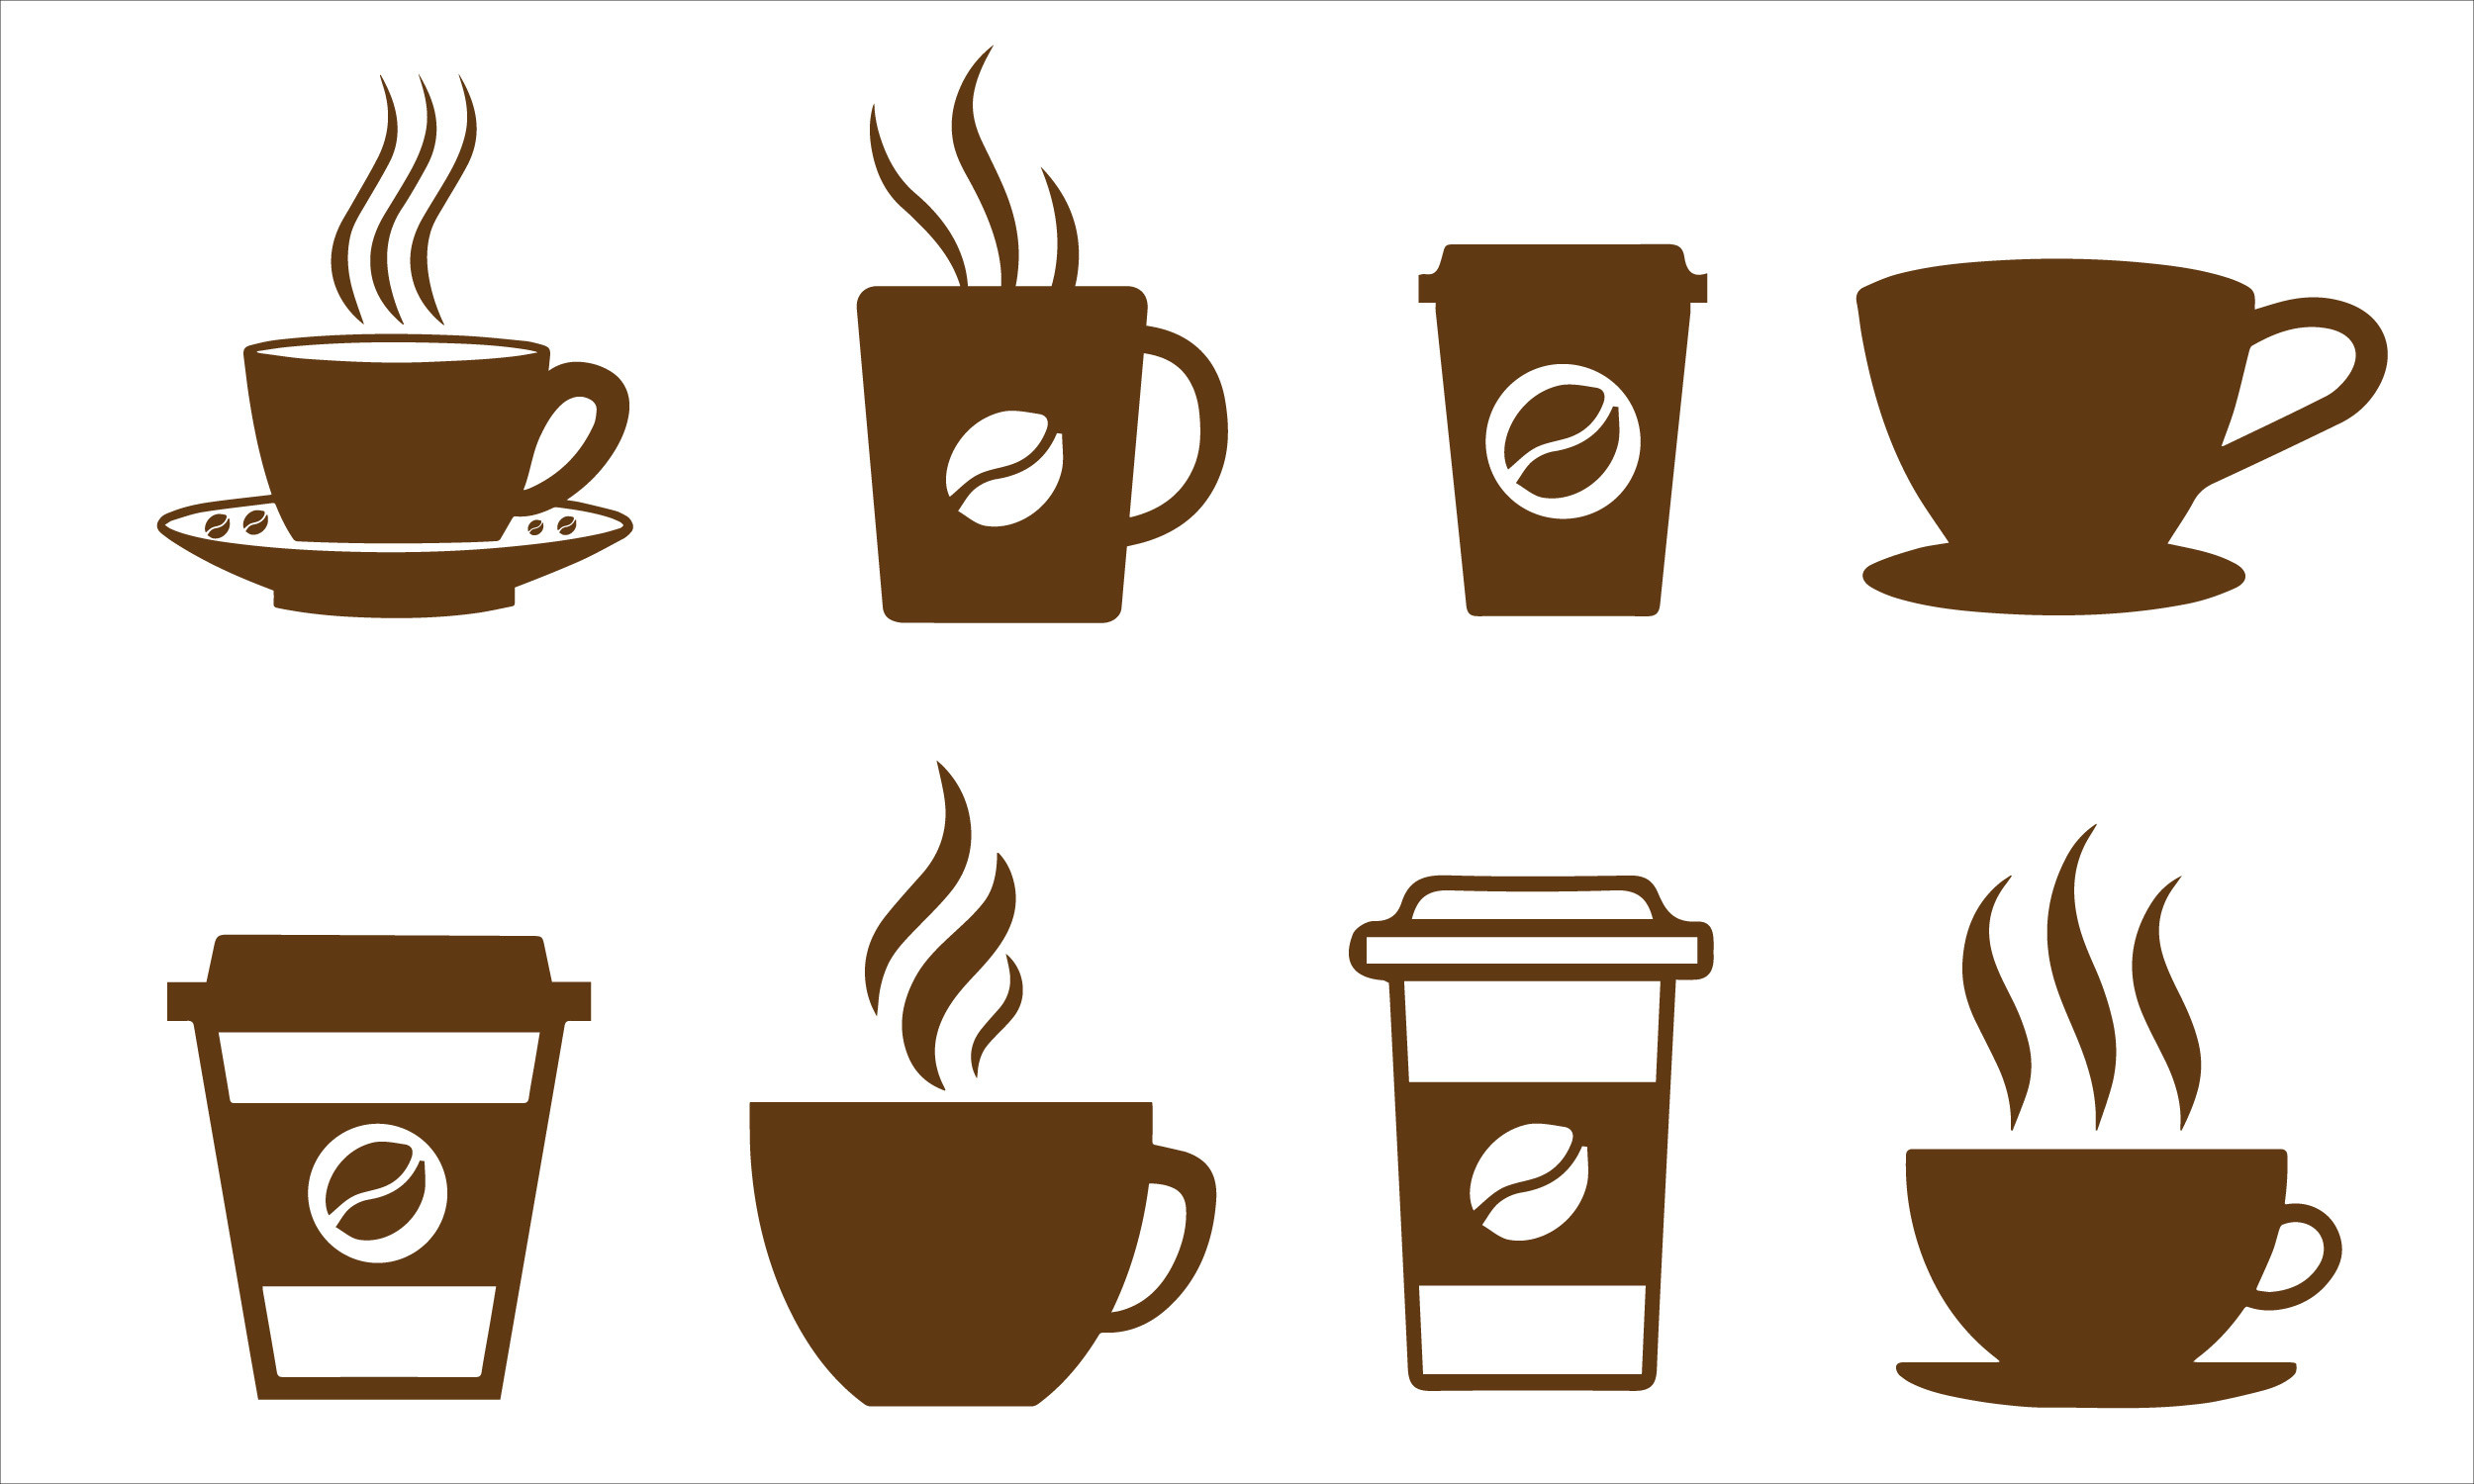 https://www.creativefabrica.com/wp-content/uploads/2021/09/05/Coffee-Cup-Svg-Coffee-Cup-Bundle-Graphics-16827595-1.jpg